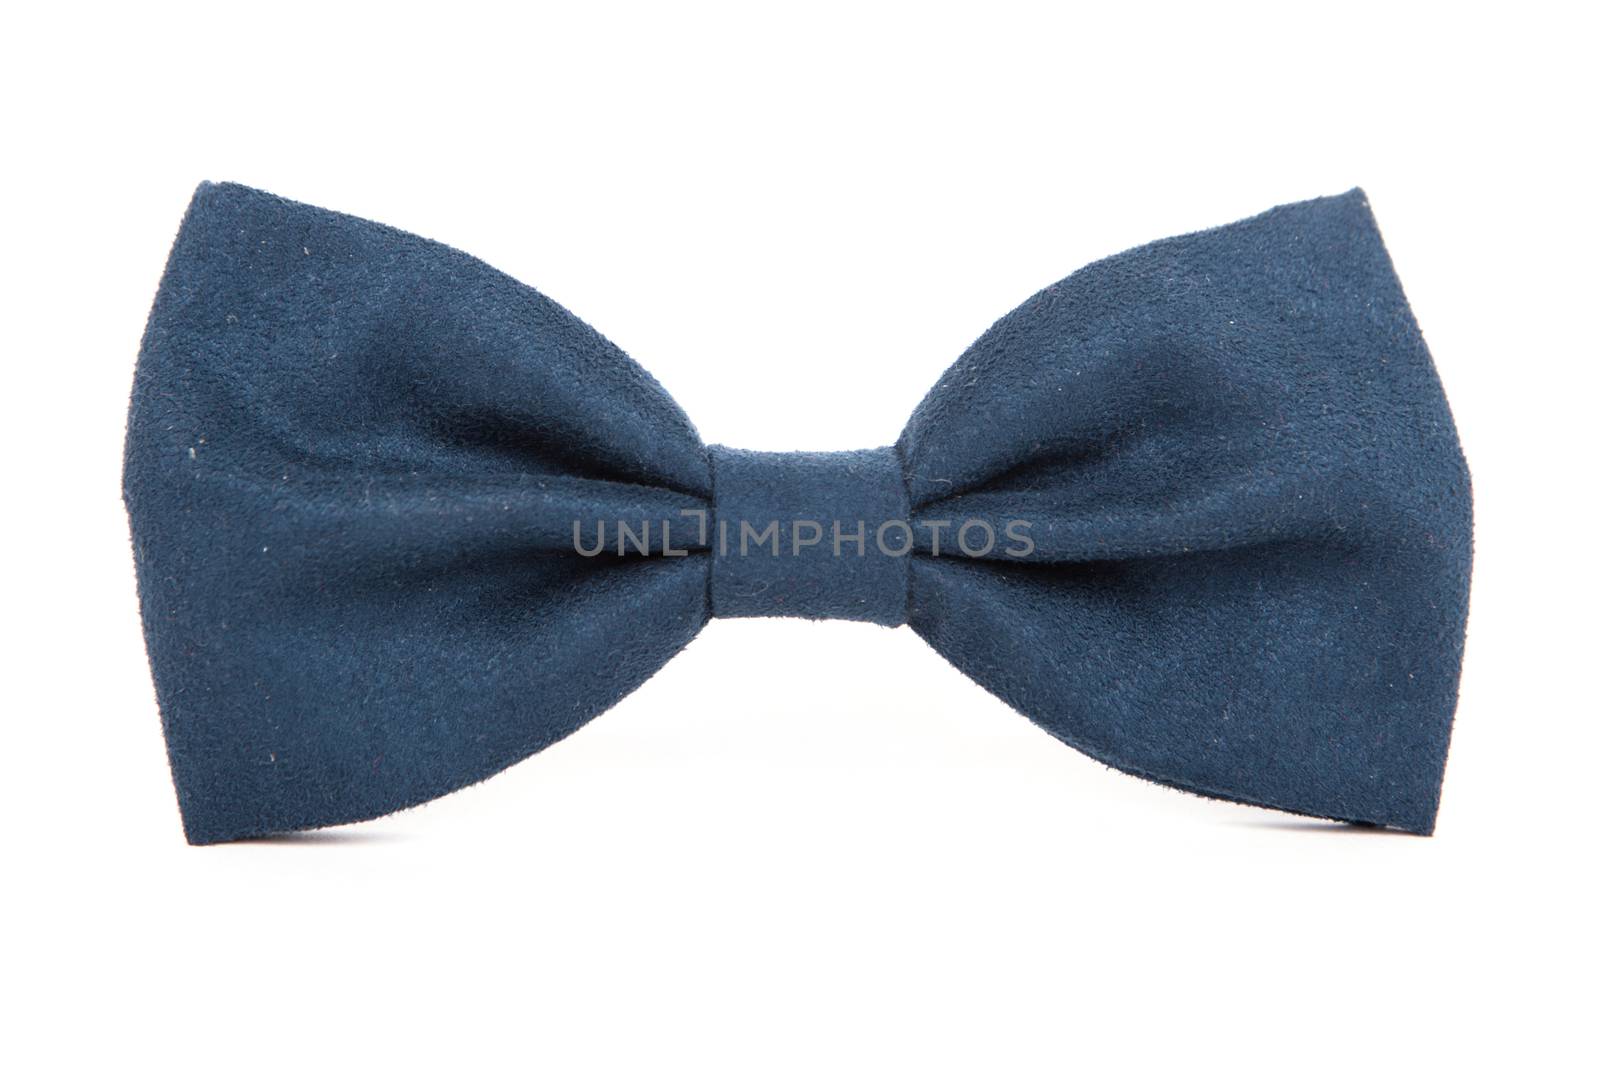 Bow tie accessory for respectable people on an isolated white background